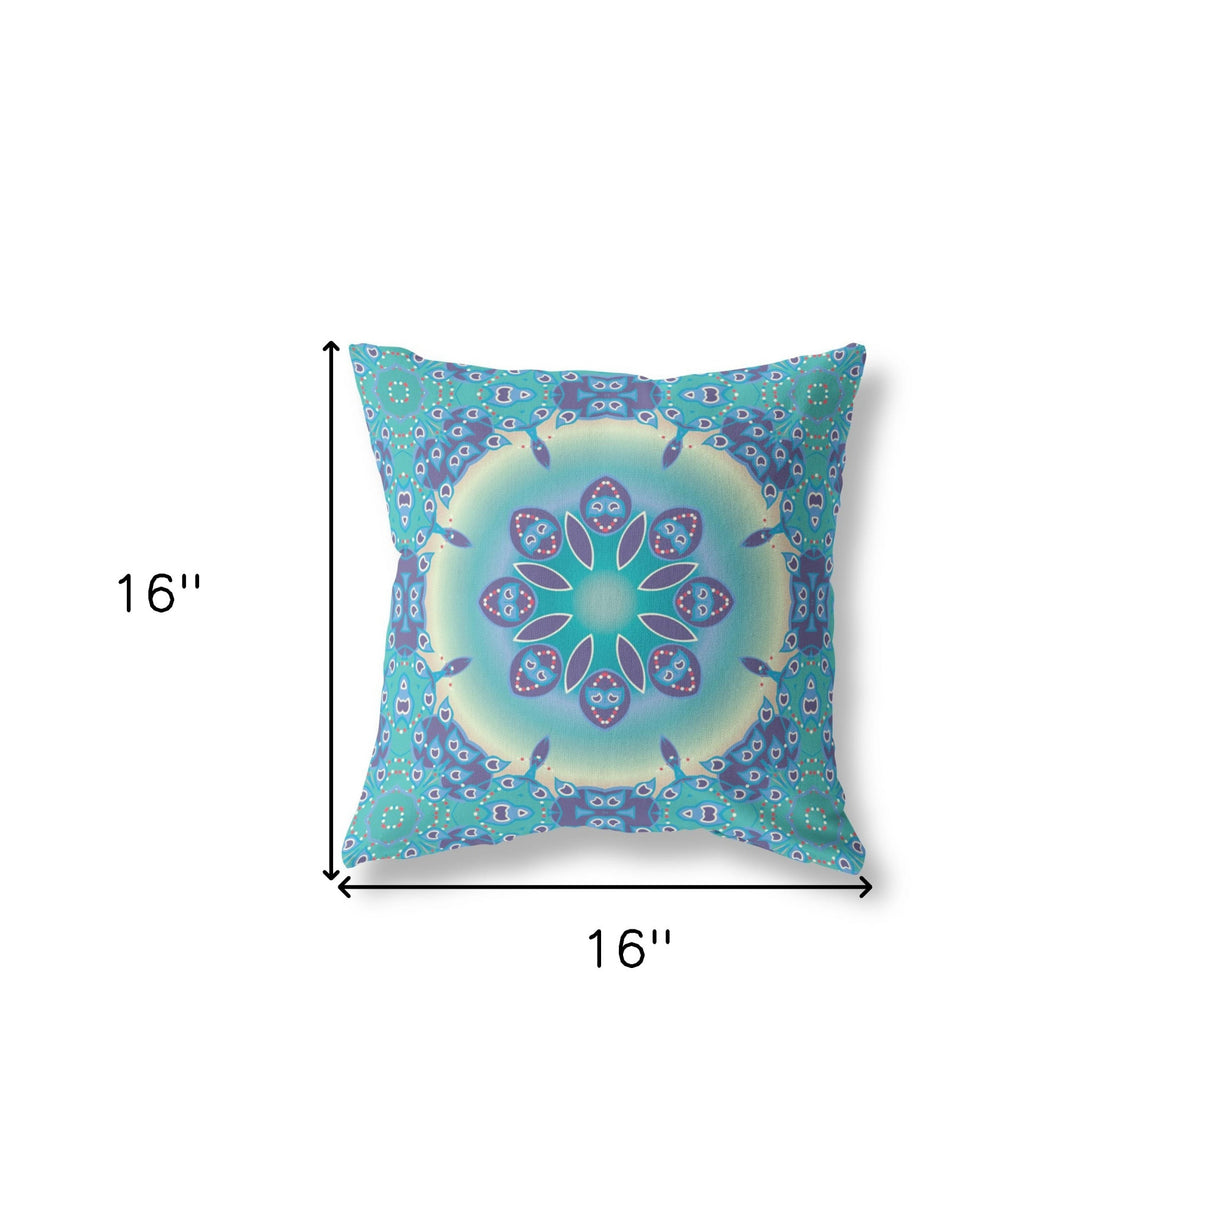 16" X 16" Blue And Purple Broadcloth Floral Throw Pillow